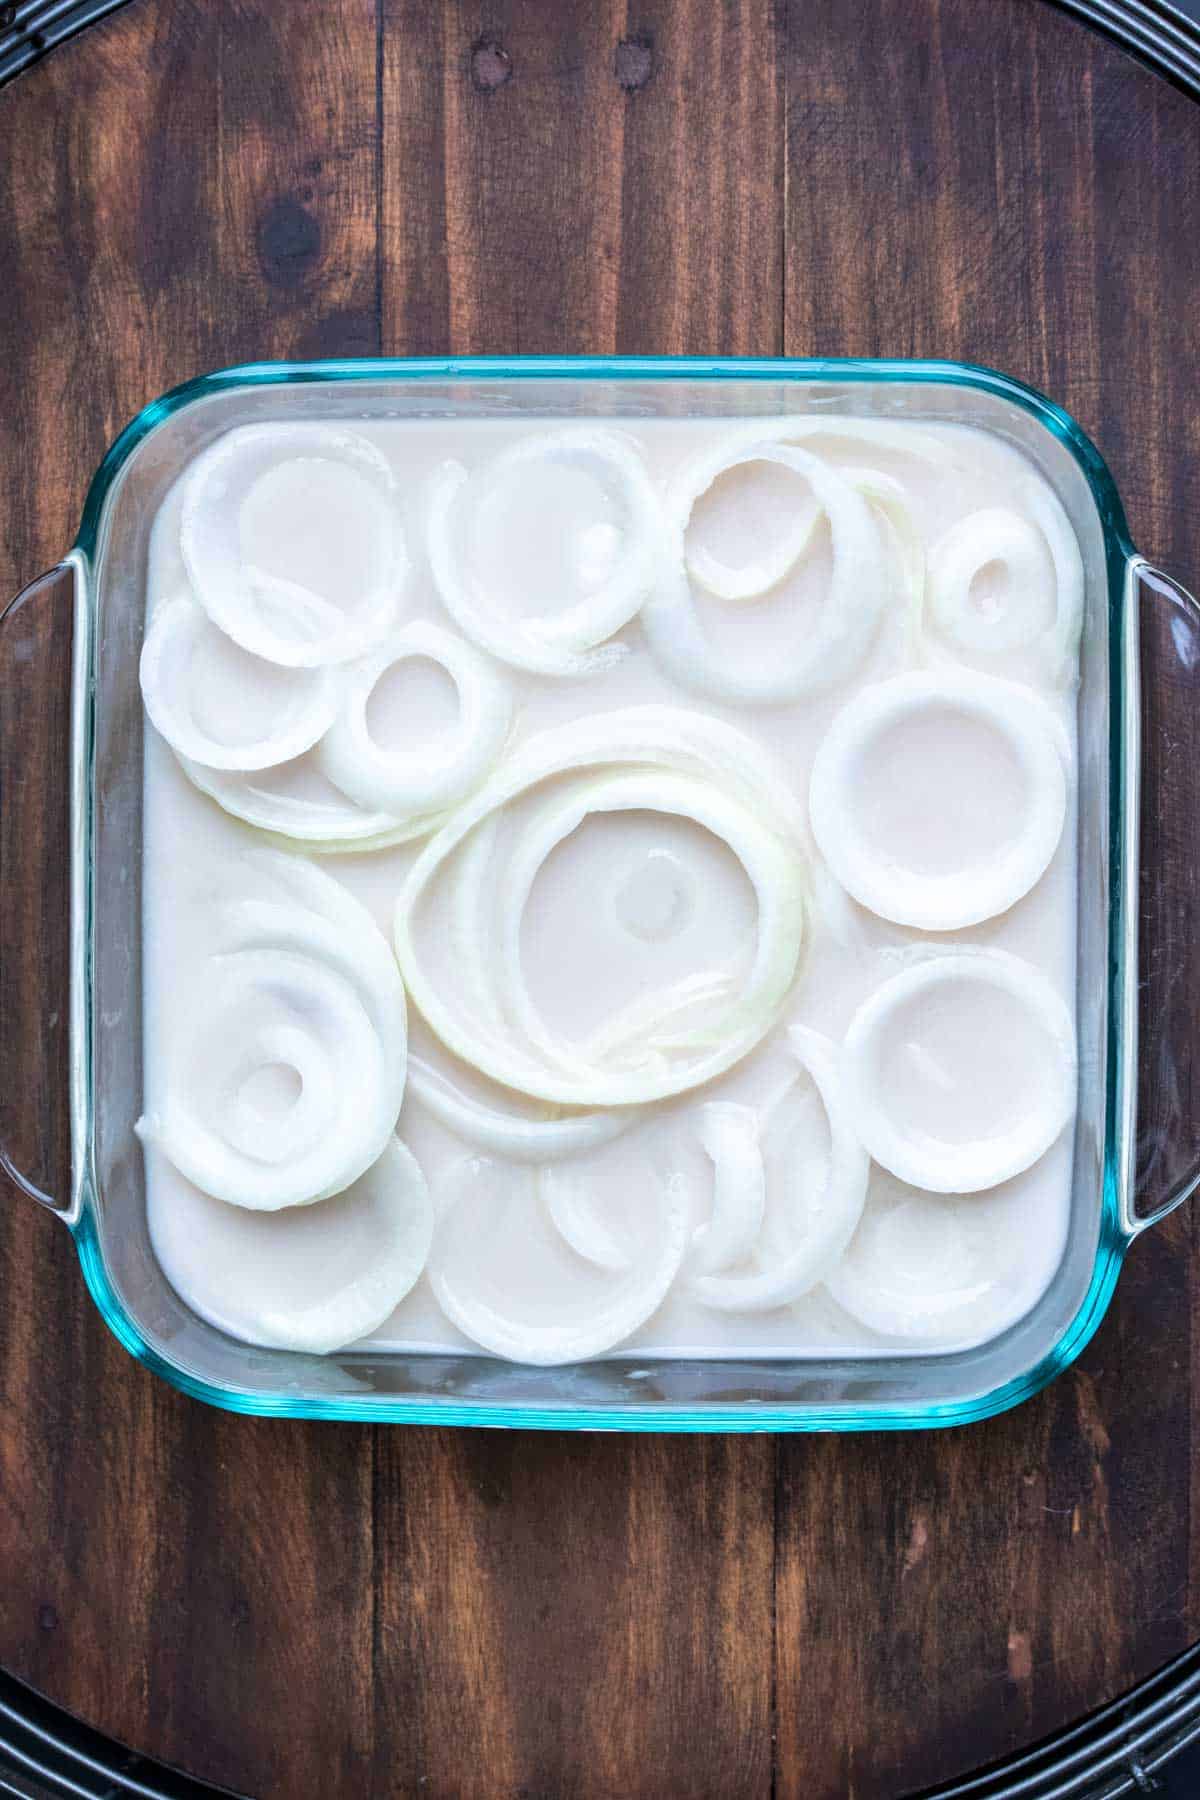 Slices of white onion soaking in a pan of milk